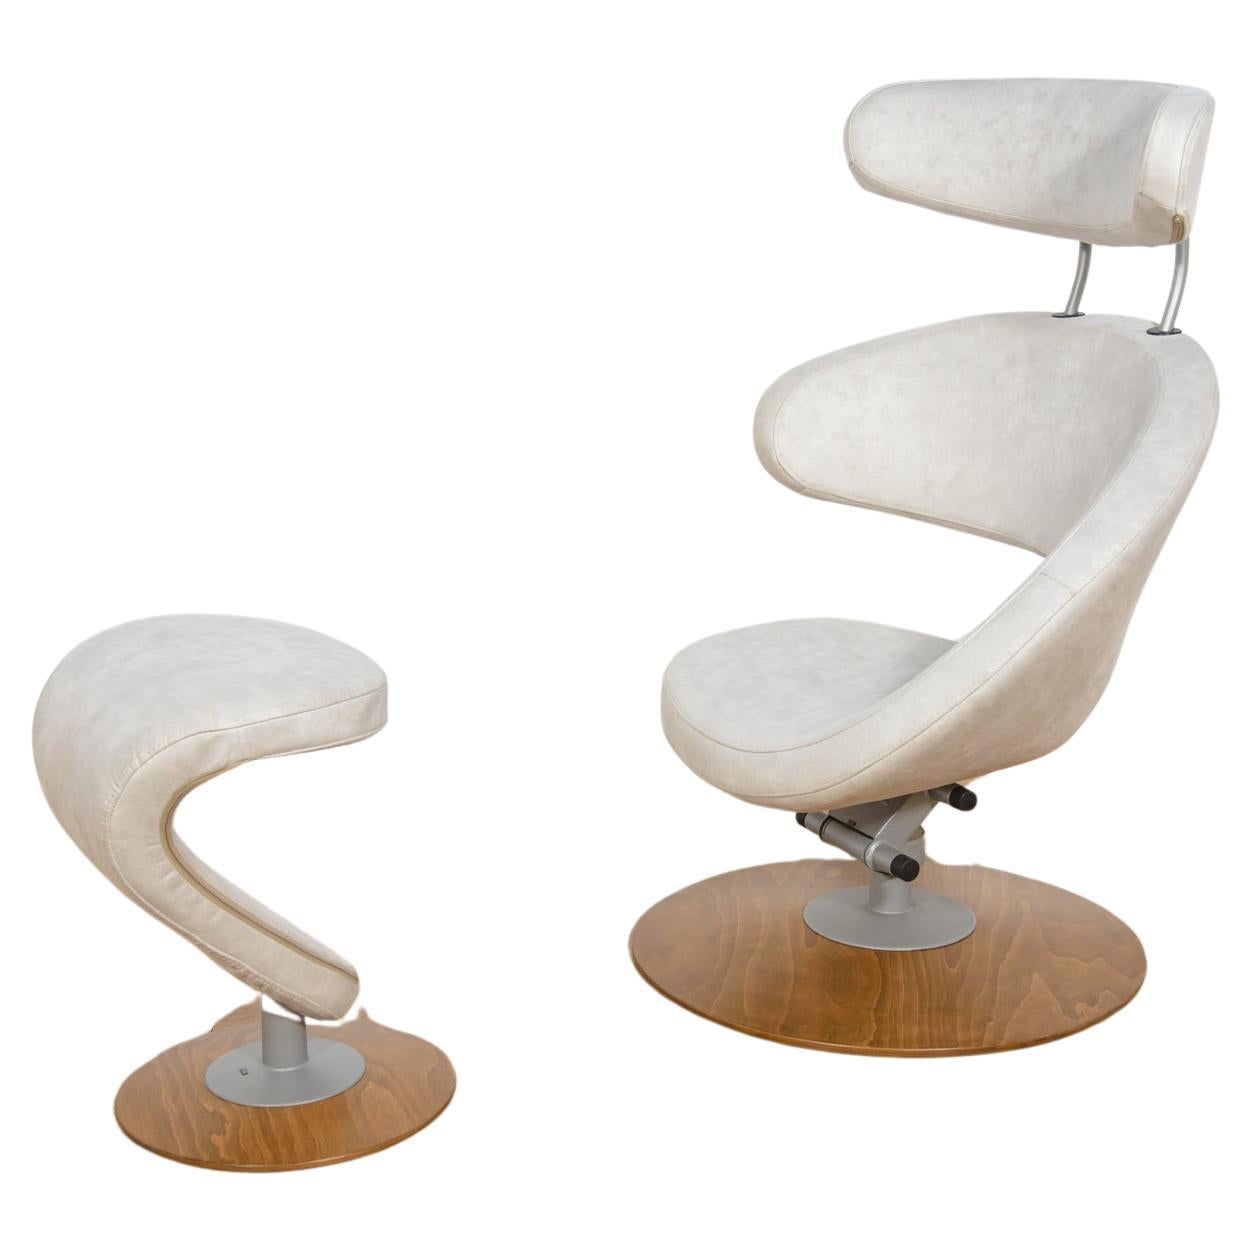 Ergonomic Lounge Chair Model Peel with Ottoman by Olav Eldoy for Stokke, 2000s. For Sale